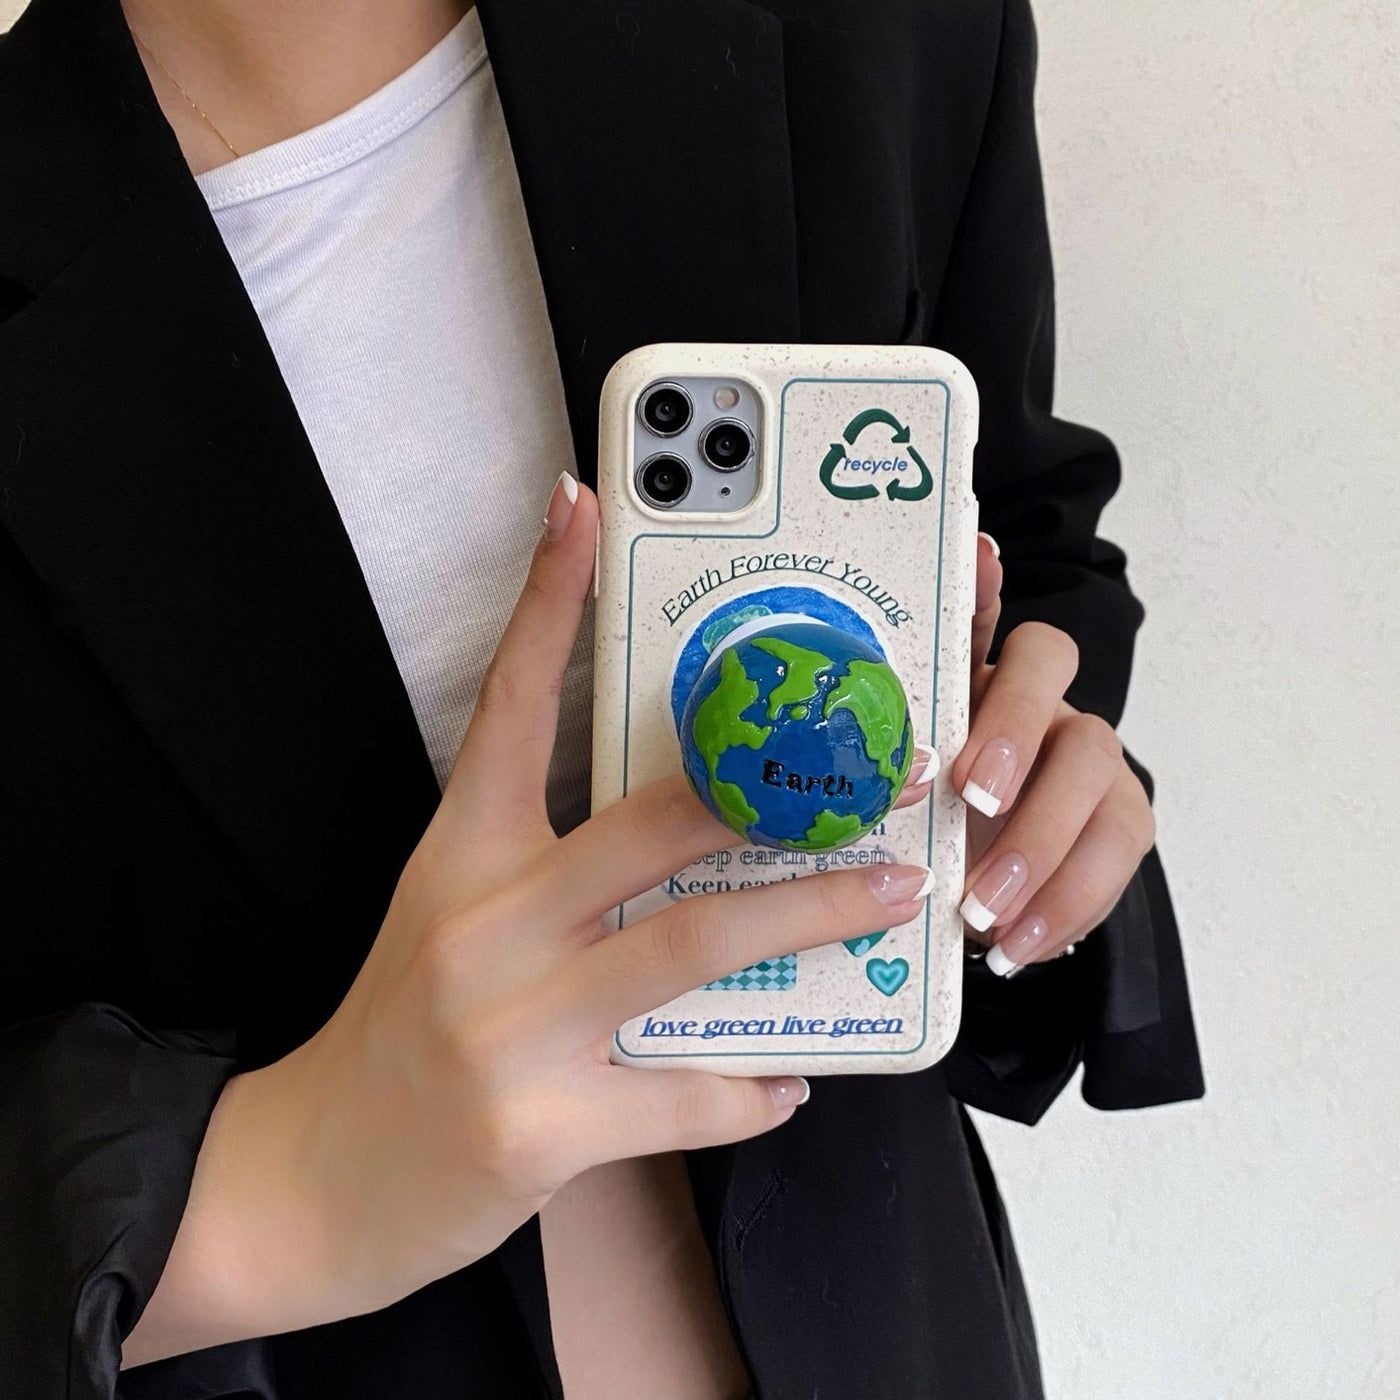 【iPhone Case】 カワイイ新作・Earth地球柄iPhoneケース